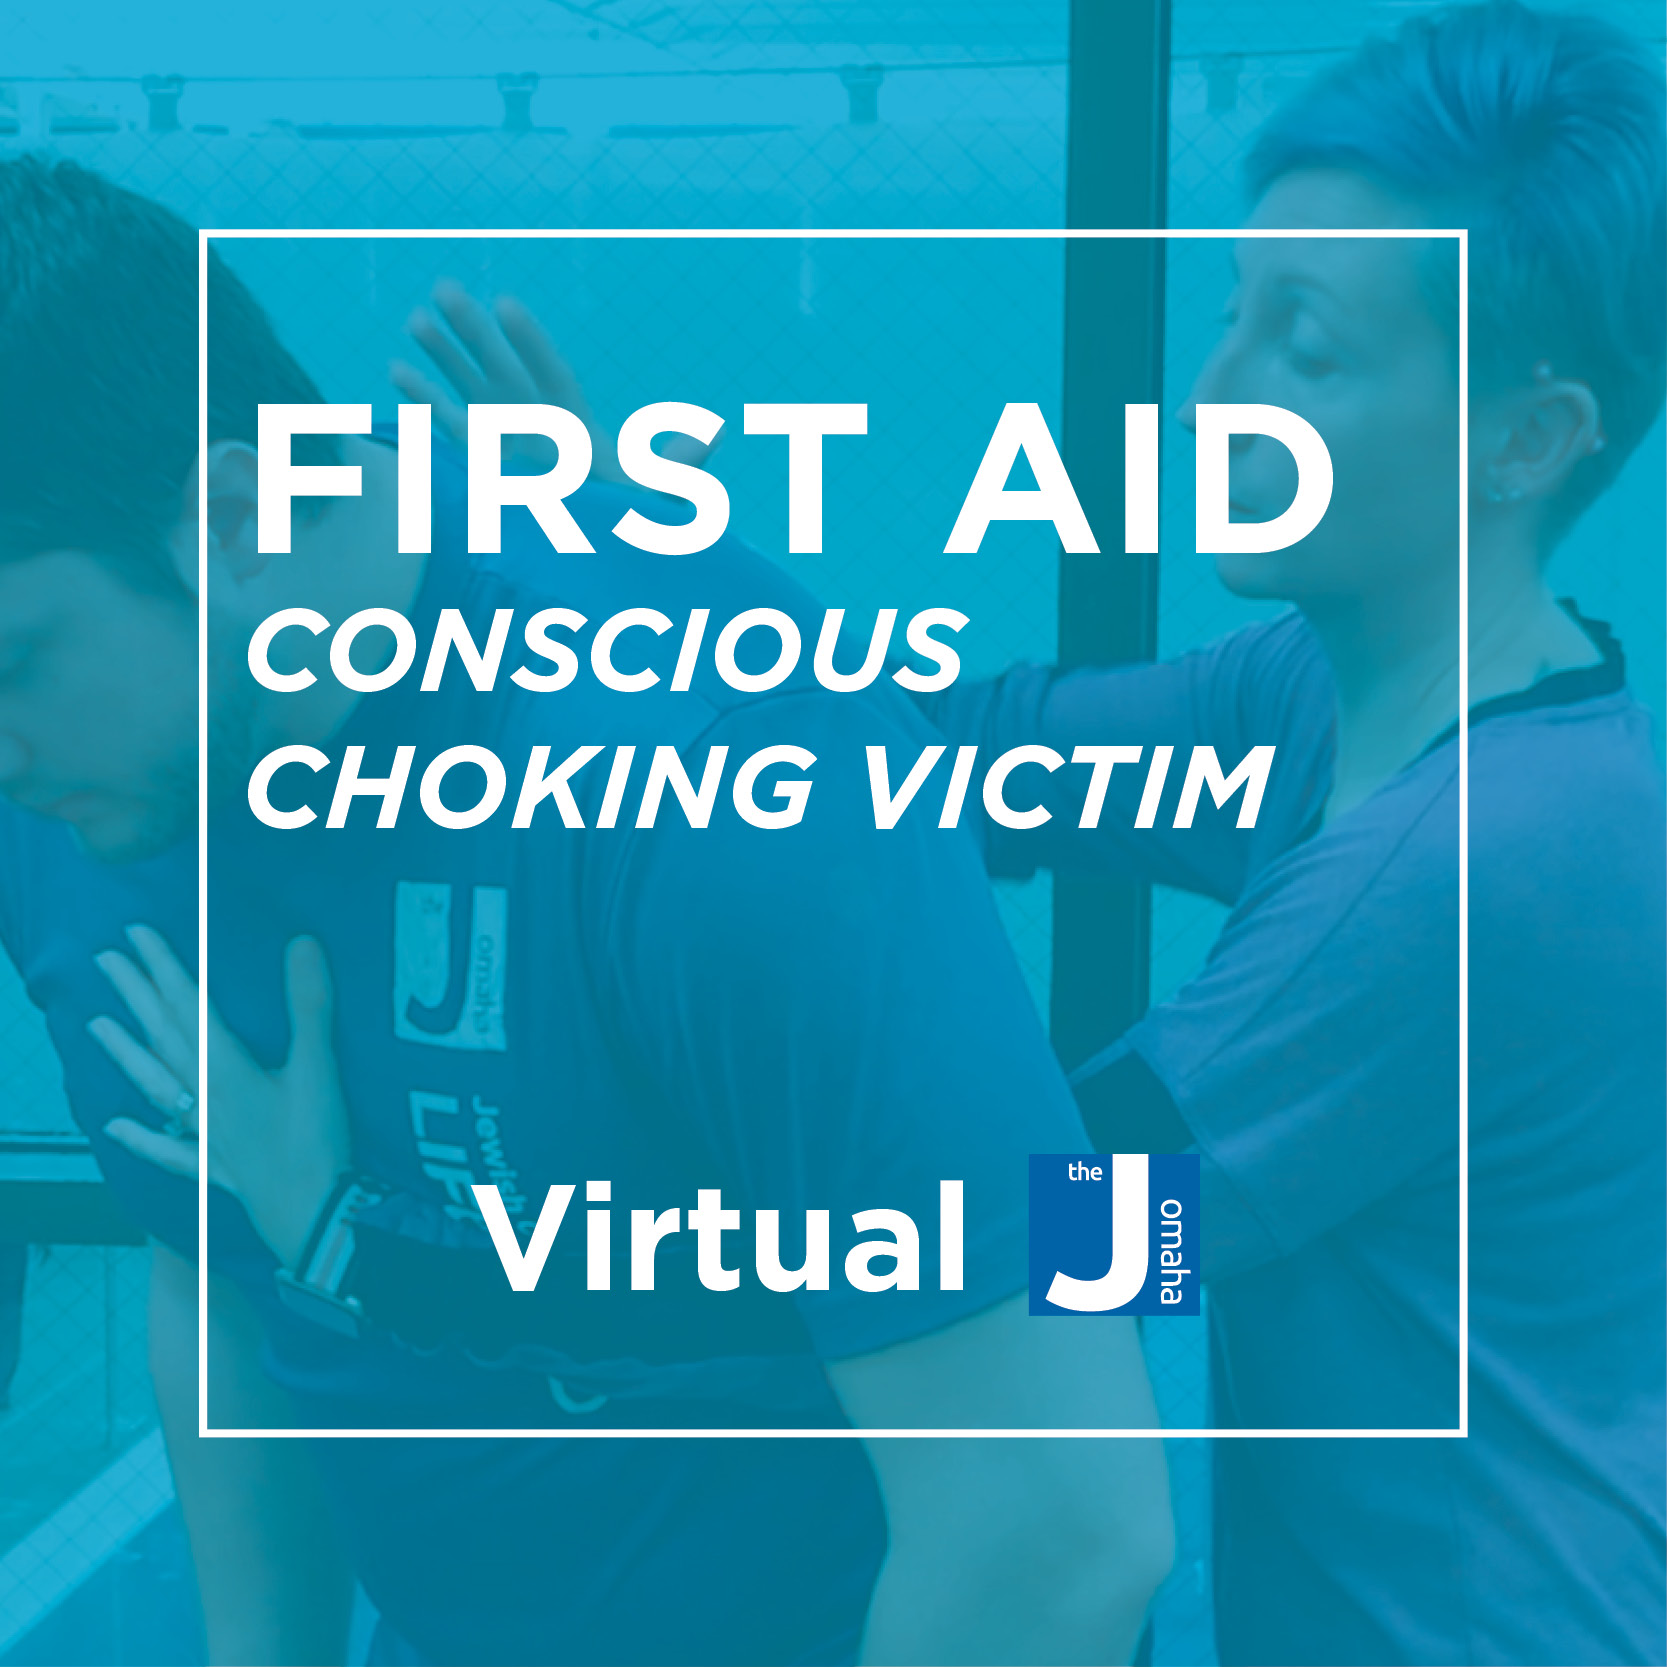 first-aid-conscious-choking-victim-the-jewish-community-center-of-omaha